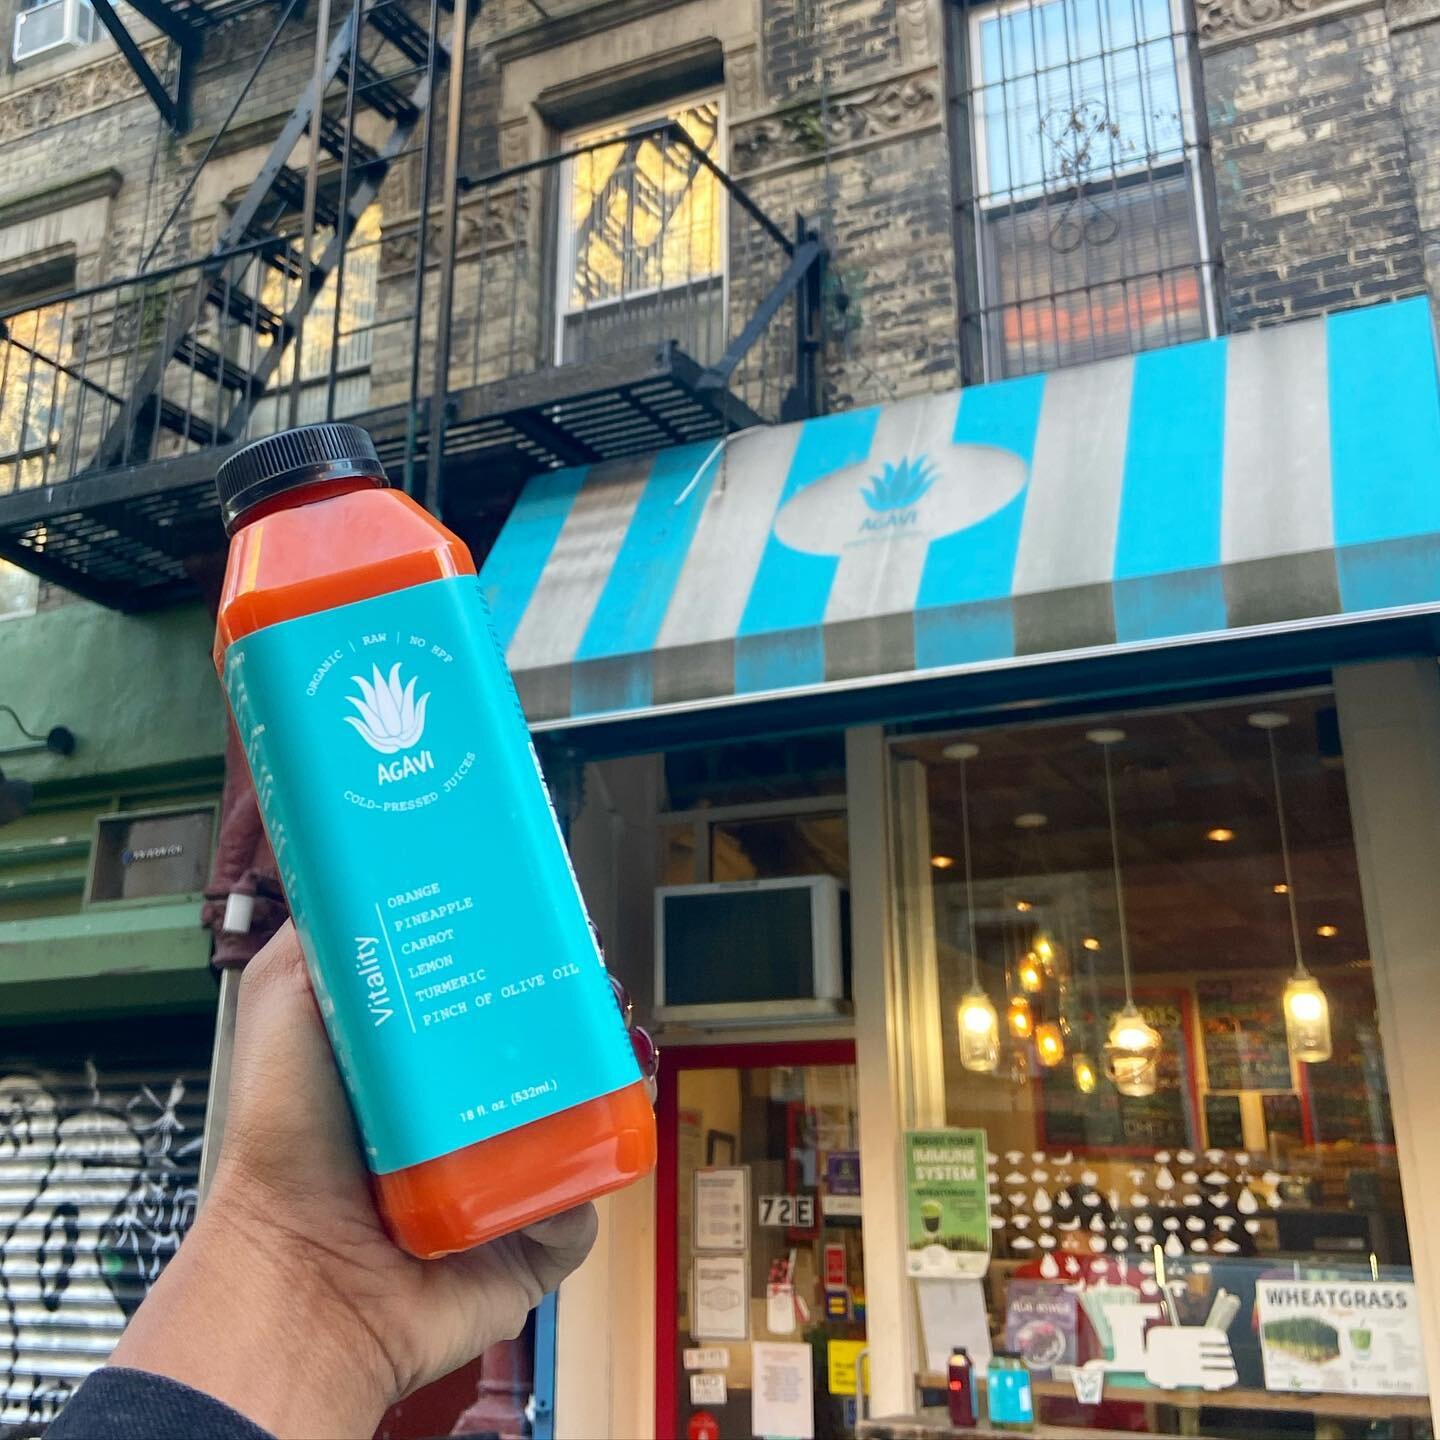 Because health is wealth 🧡 The winter weather is here so it&rsquo;s time to boost that immune system ✨ Stop by Agavi for all your immune boosting needs

📸 Tag us in your #AGAVI photos!
📍 EAST VILLAGE
💌 Catering: info@agavijuice.com
✨ 100% Raw 100